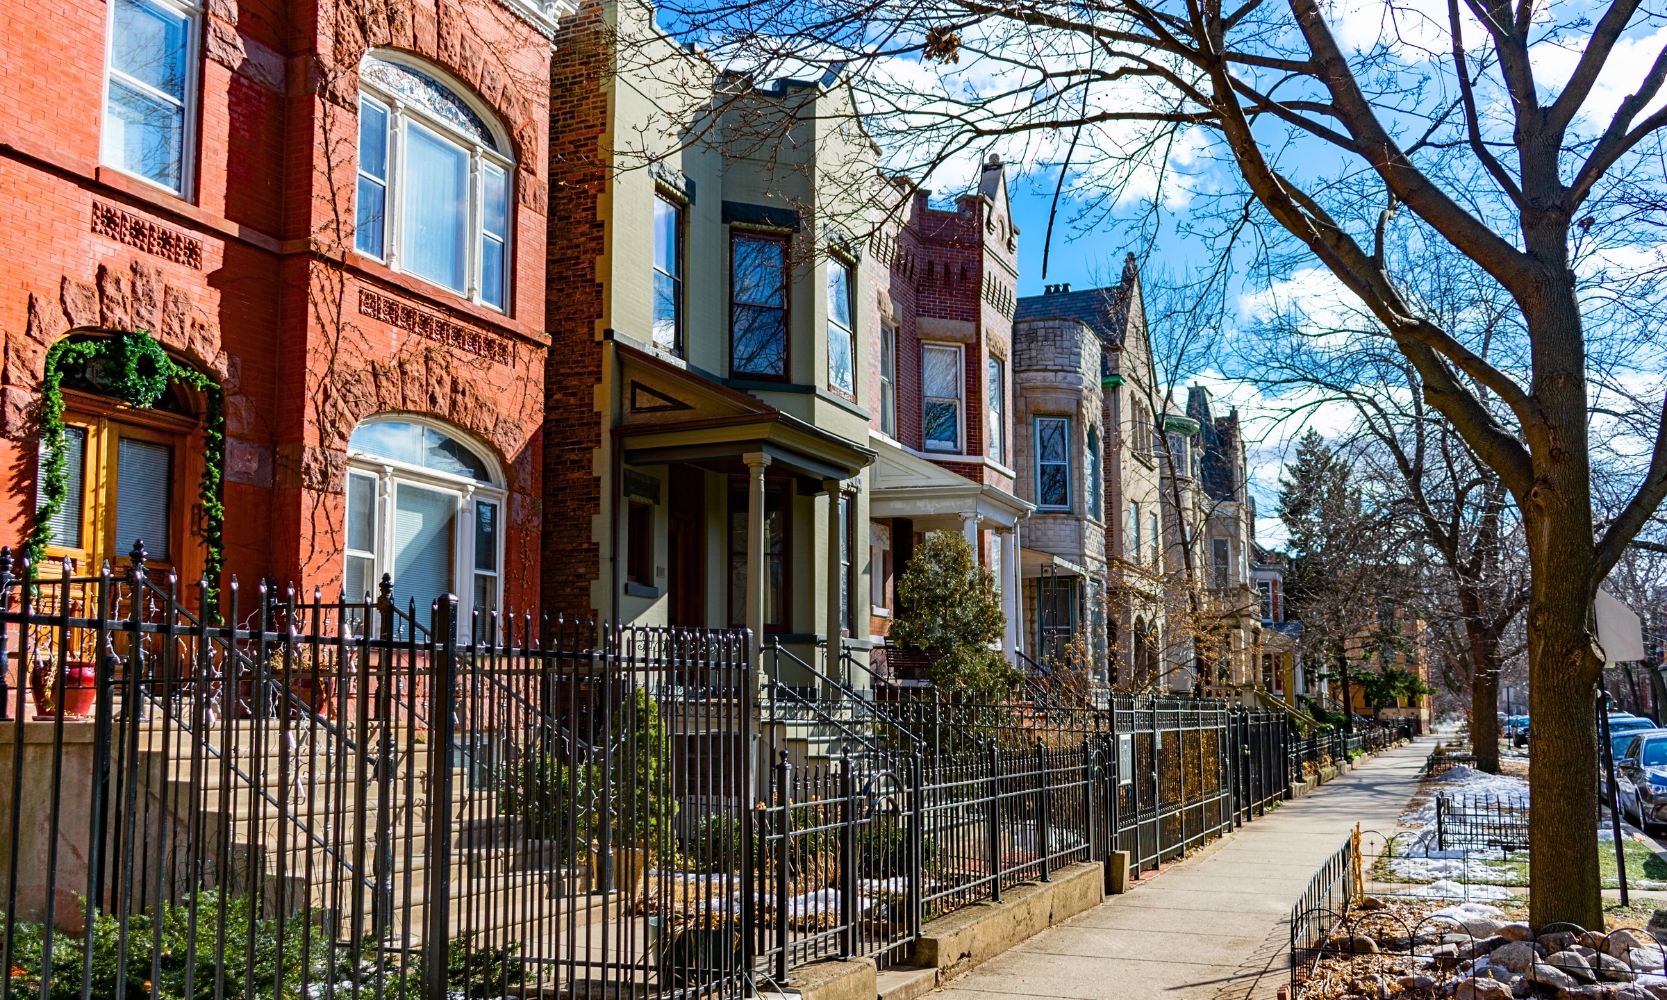 An image of Ravenswood Chicago row homes with front yards and tree-lined sidewalks